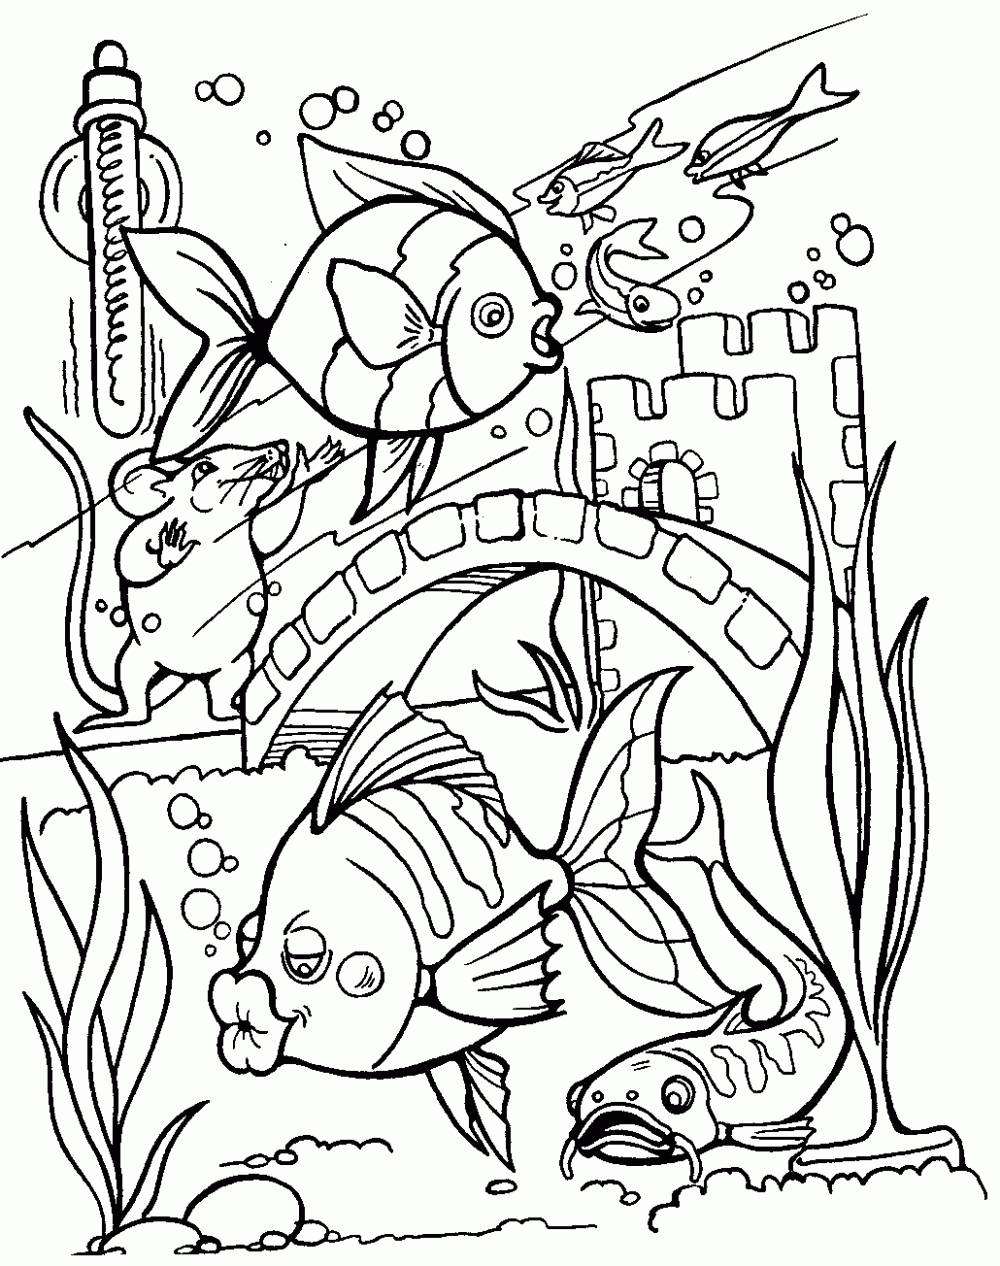 fish coloring pages for adults 18 best images about ocean world on pinterest adult for fish adults coloring pages 